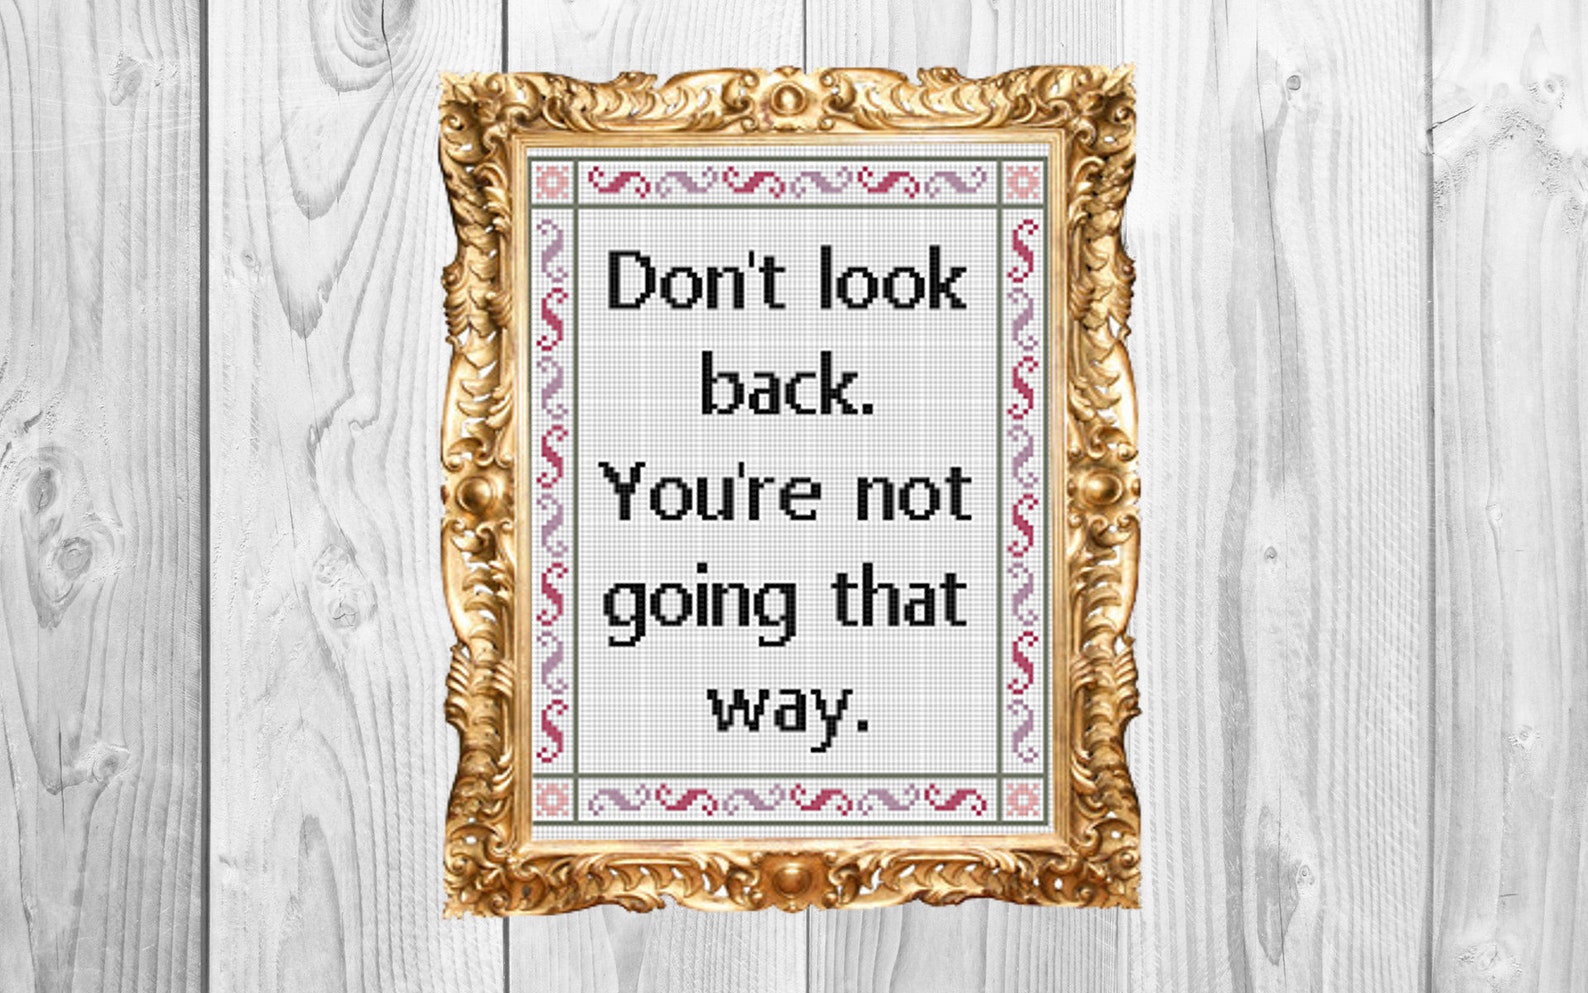 Dont way. Don’t look back you’re not going that way.